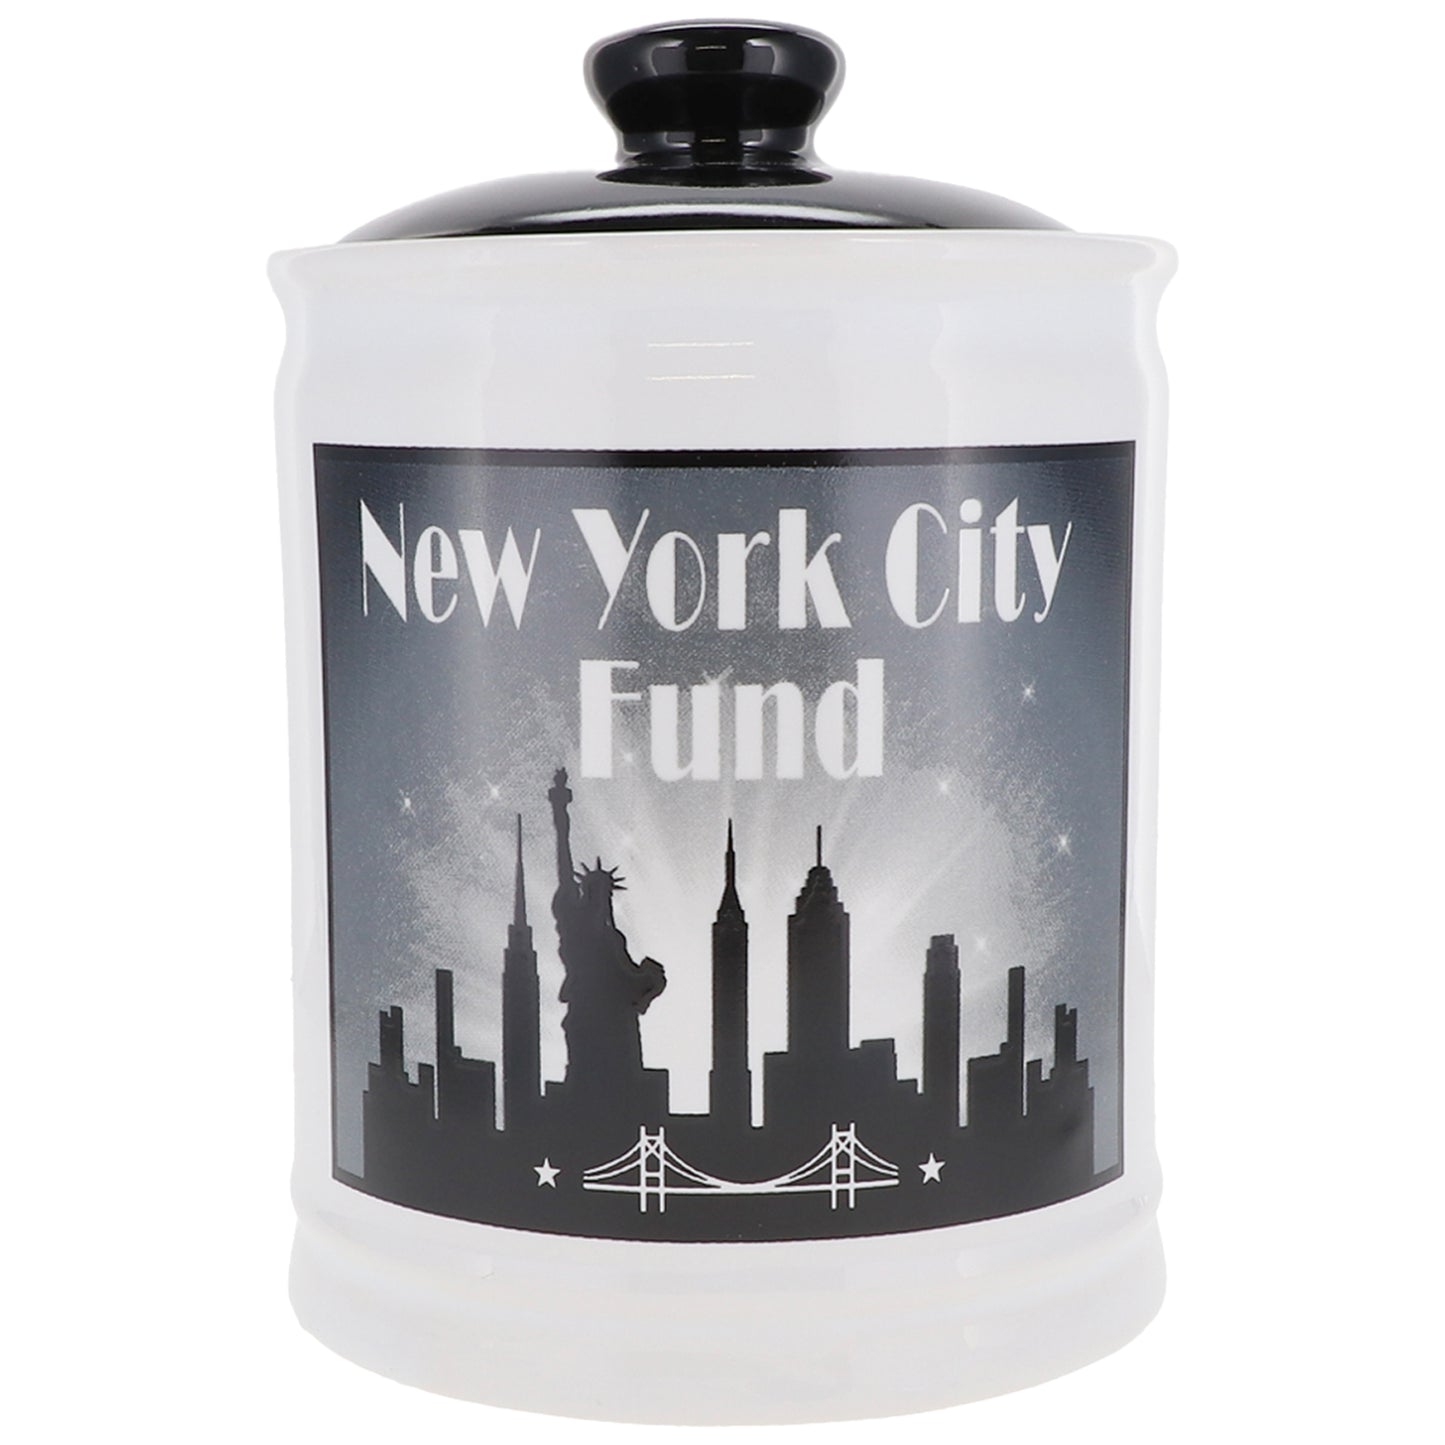 Cottage Creek New York City Fund Piggy Bank, Ceramic, 6", Multicolored Vacation Bank